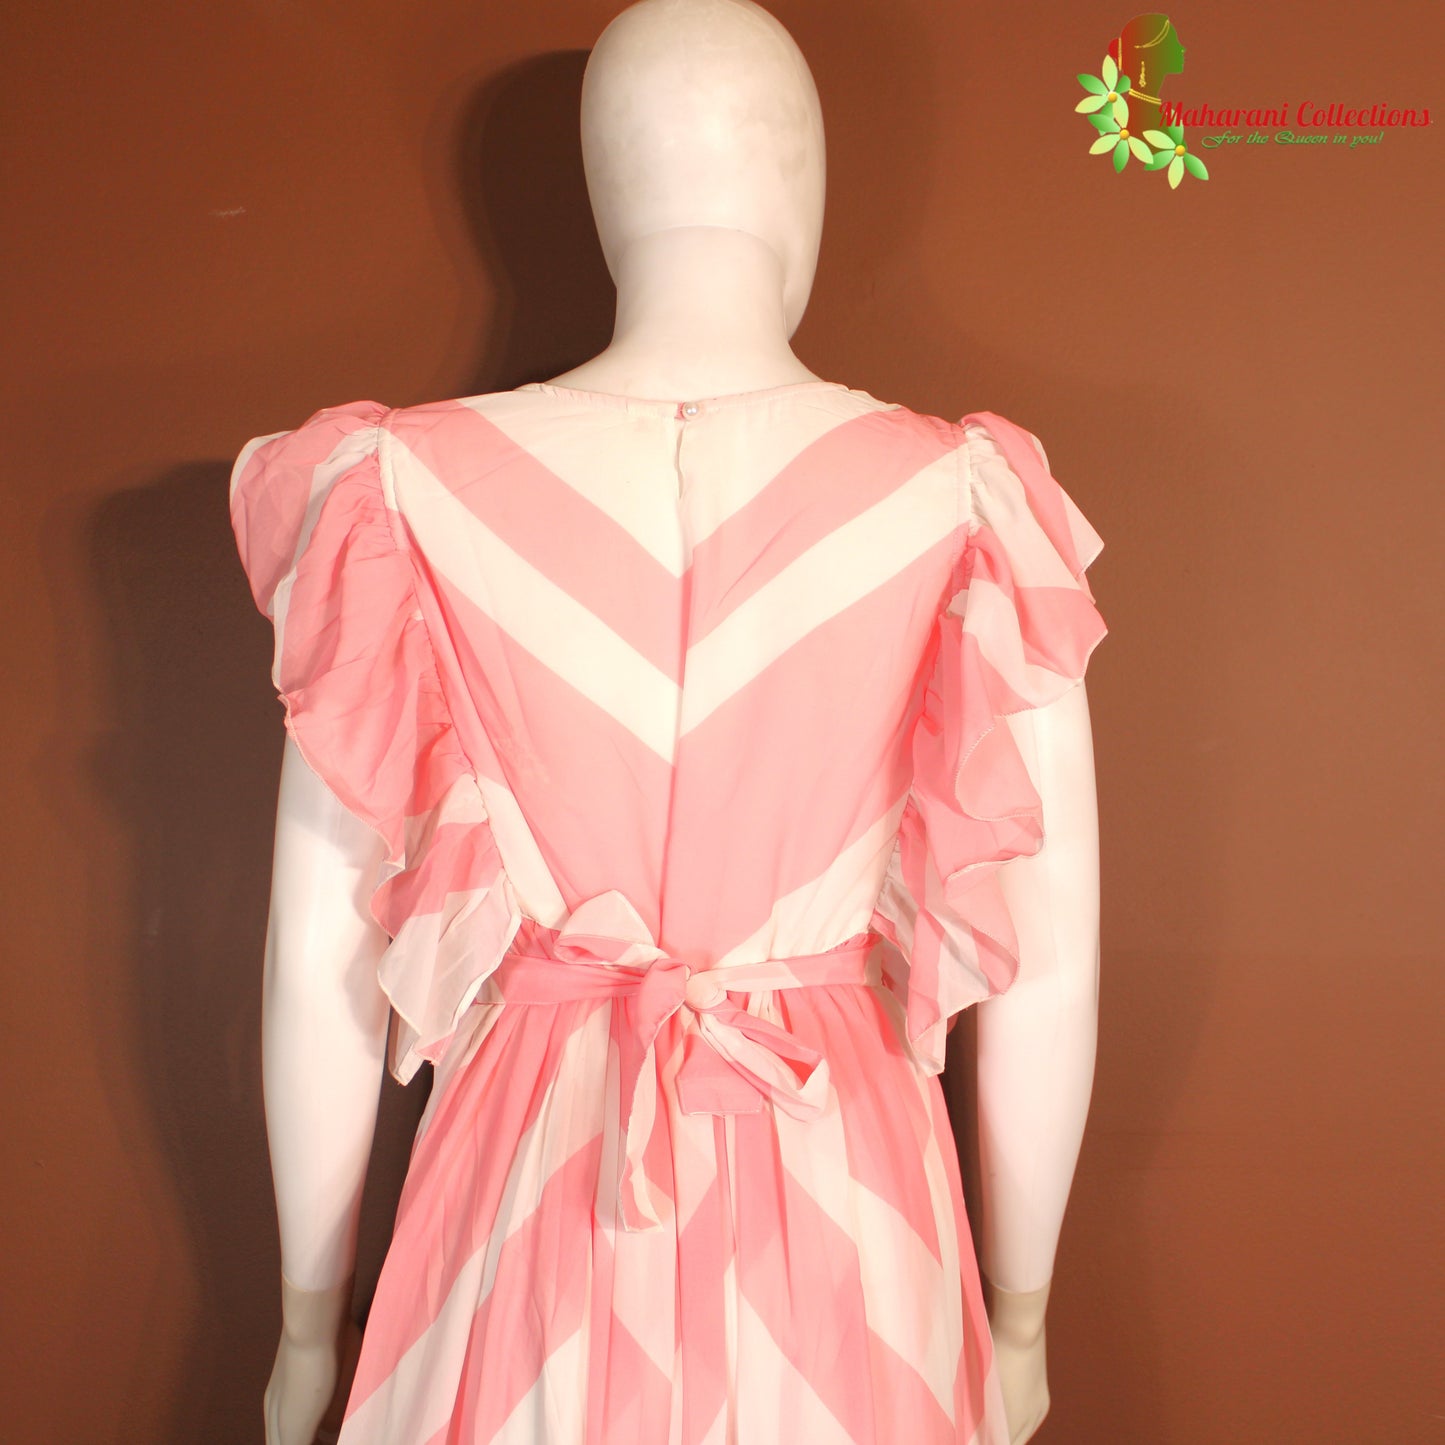 Maharani's Long Dress - Georgette - Pink and White (S, M, L, XL)